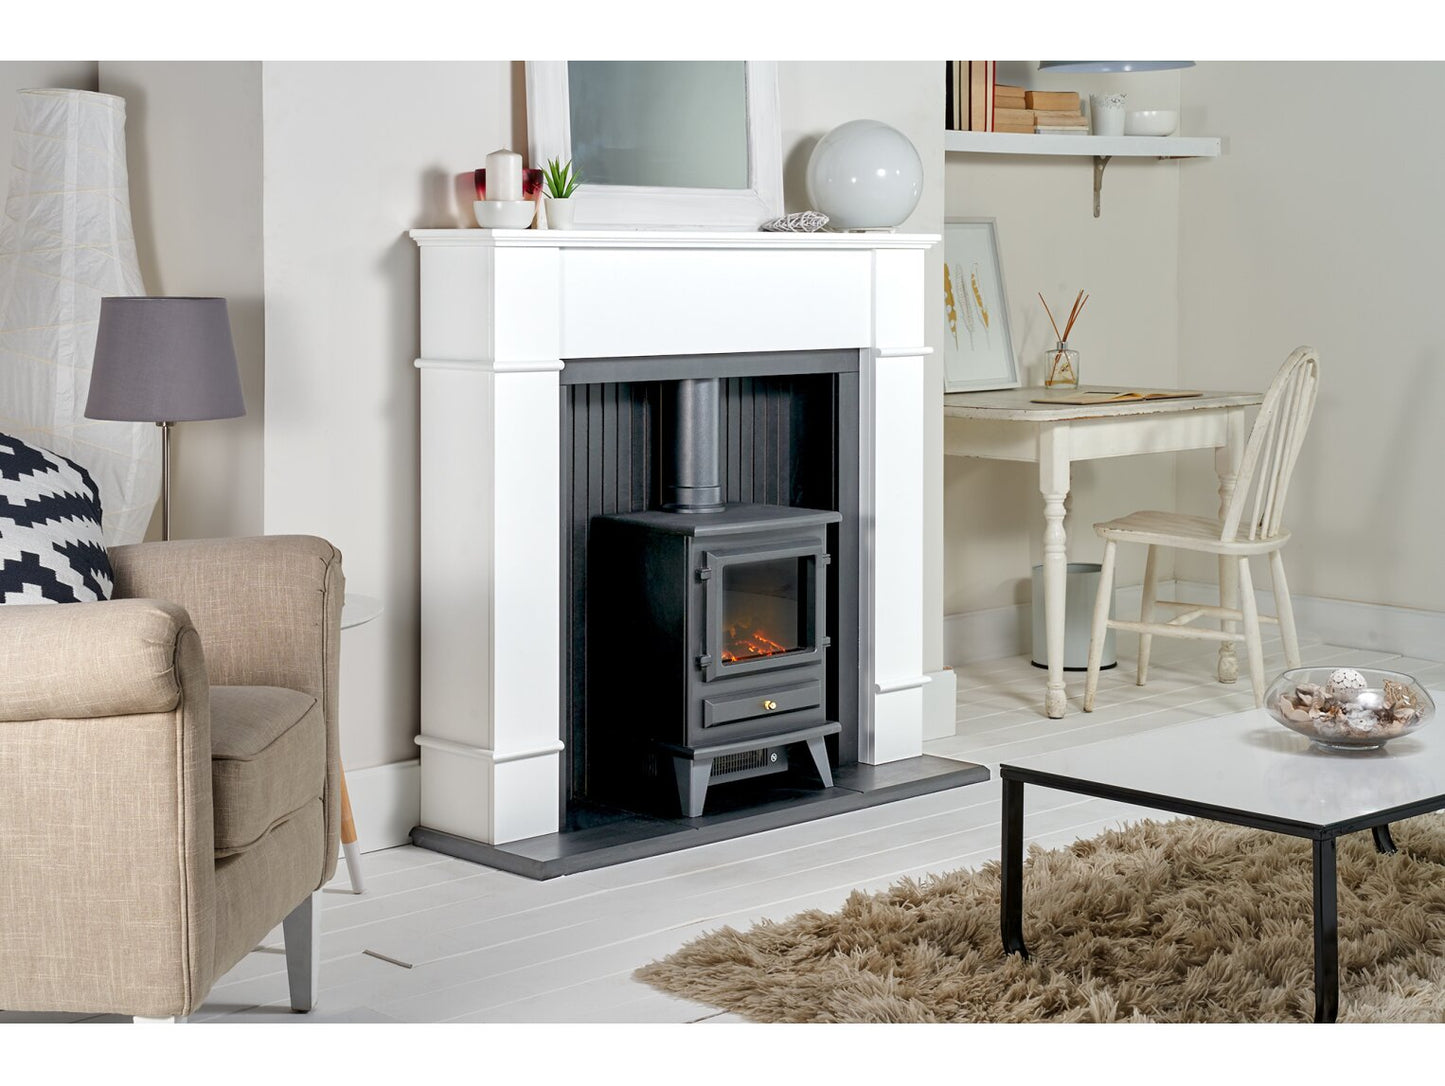 Adam Oxford Stove Fireplace with Hudson Electric Stove 48 Inch 21495 Pure White & Black